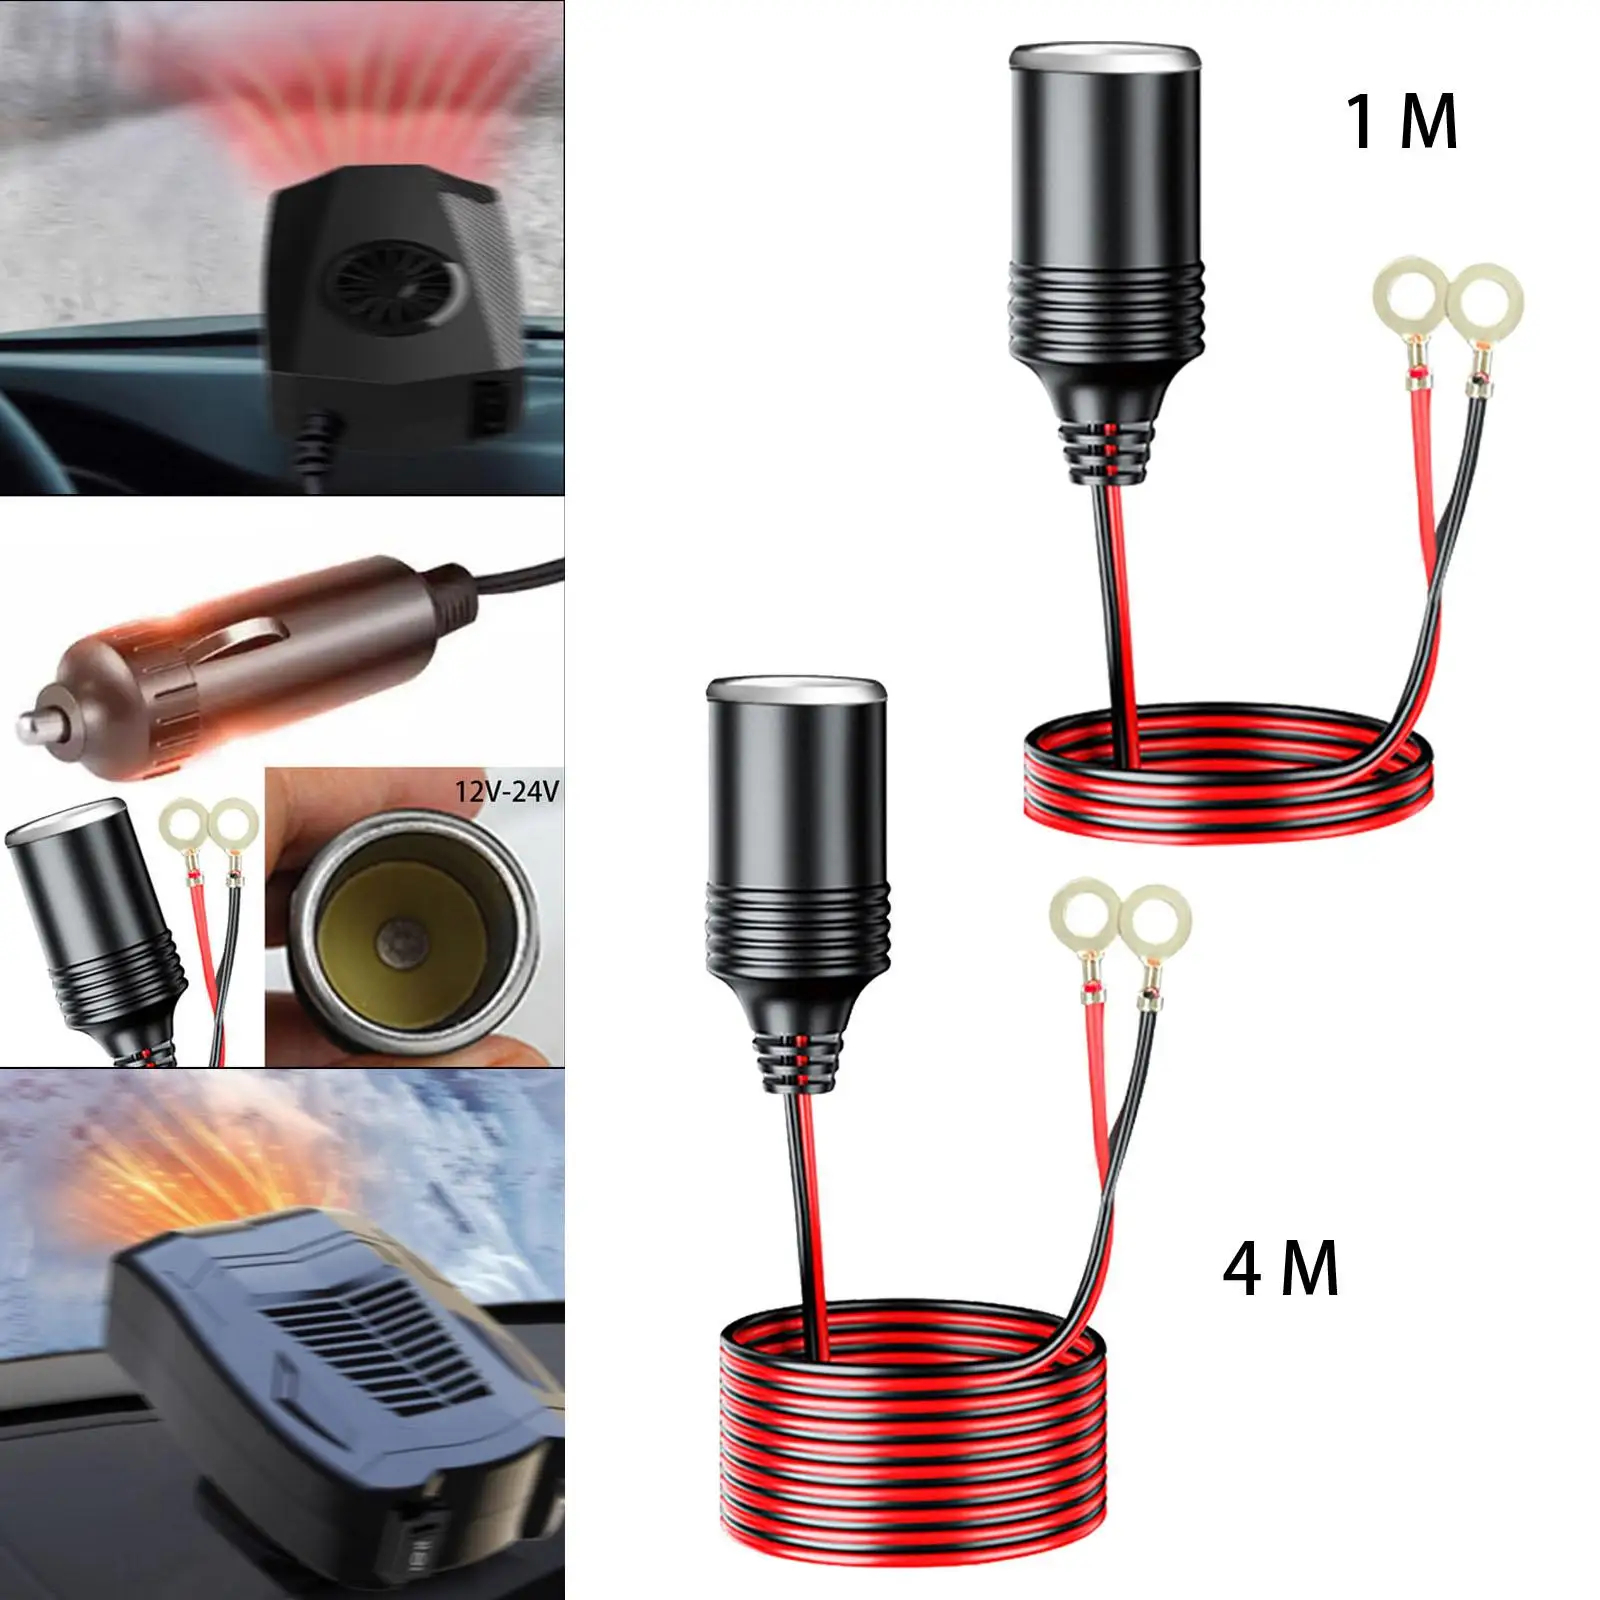 Cigarette Lighter Adapter Power Supply Cord Accessories Professional Easy Installation Power Supply Adapter Extension Cord